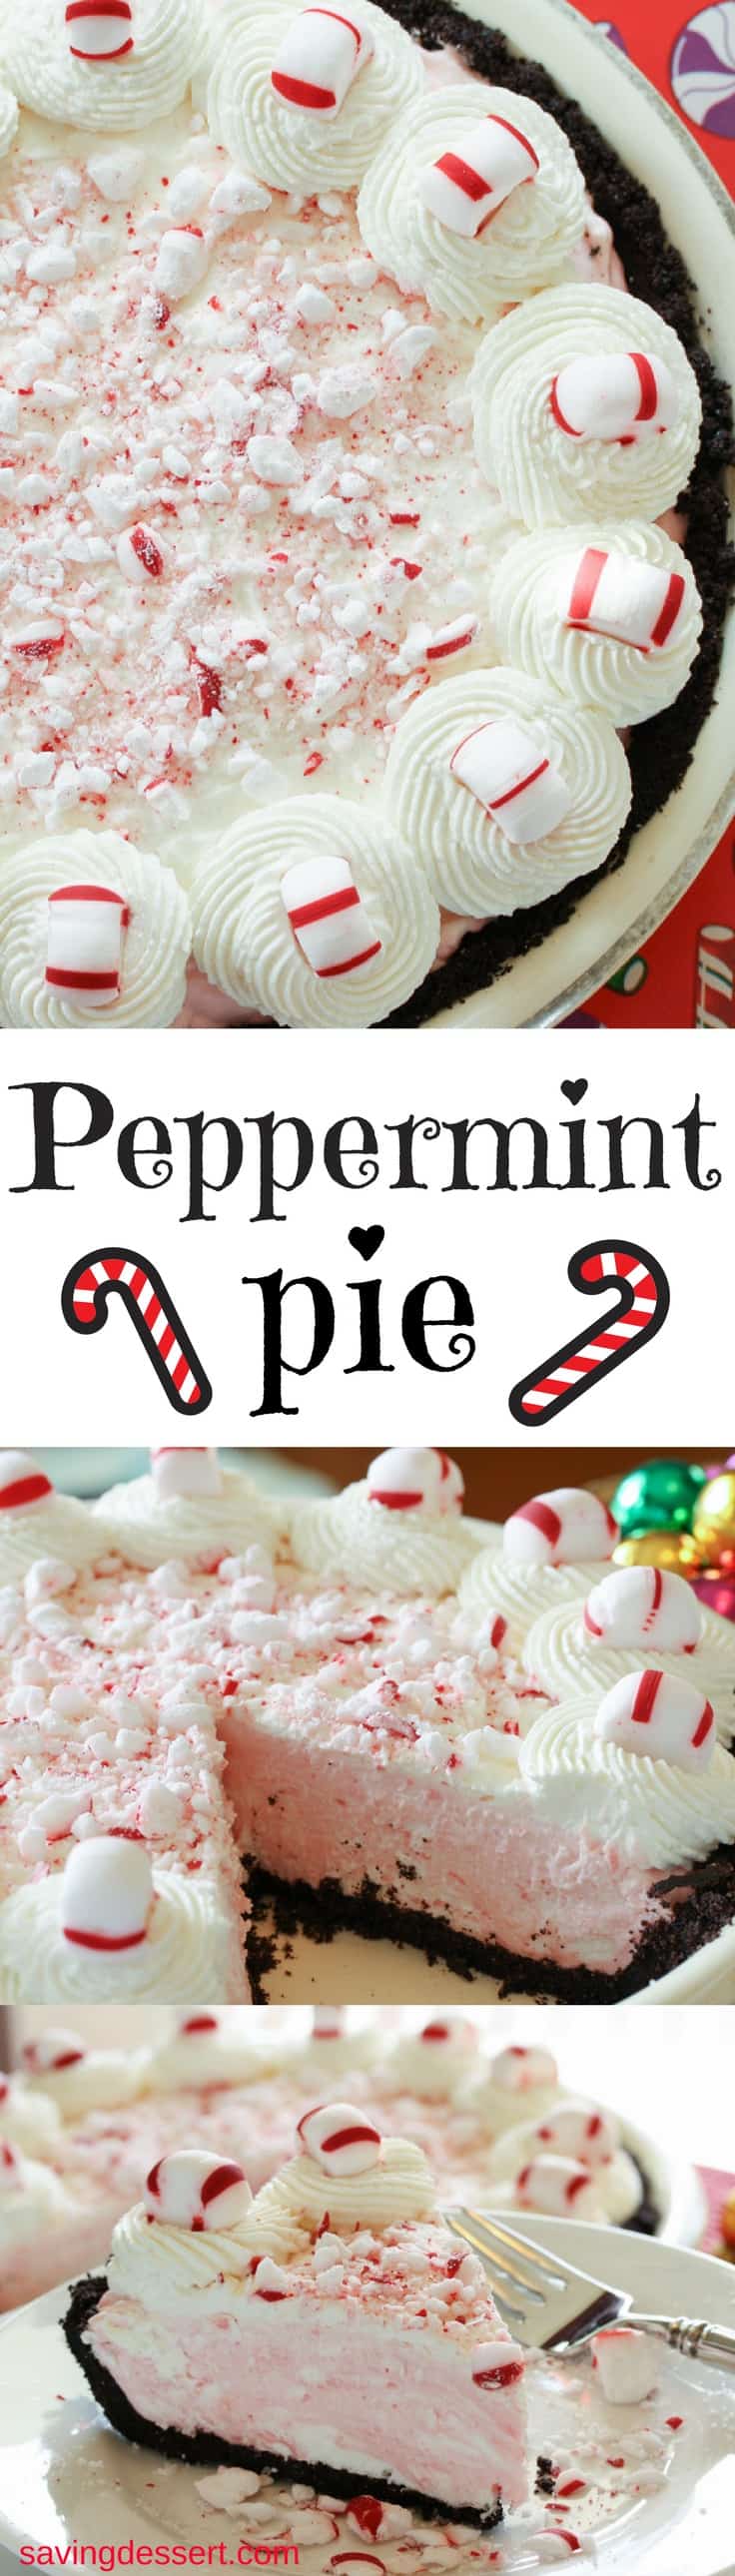 Peppermint Pie ~ light and fluffy, simple and sweet, with all the flavors of the holiday season! www.savingdessert.com #savingroomfordessert #peppermint #pie #holidaypie #dessert #Christmas #peppermintpie